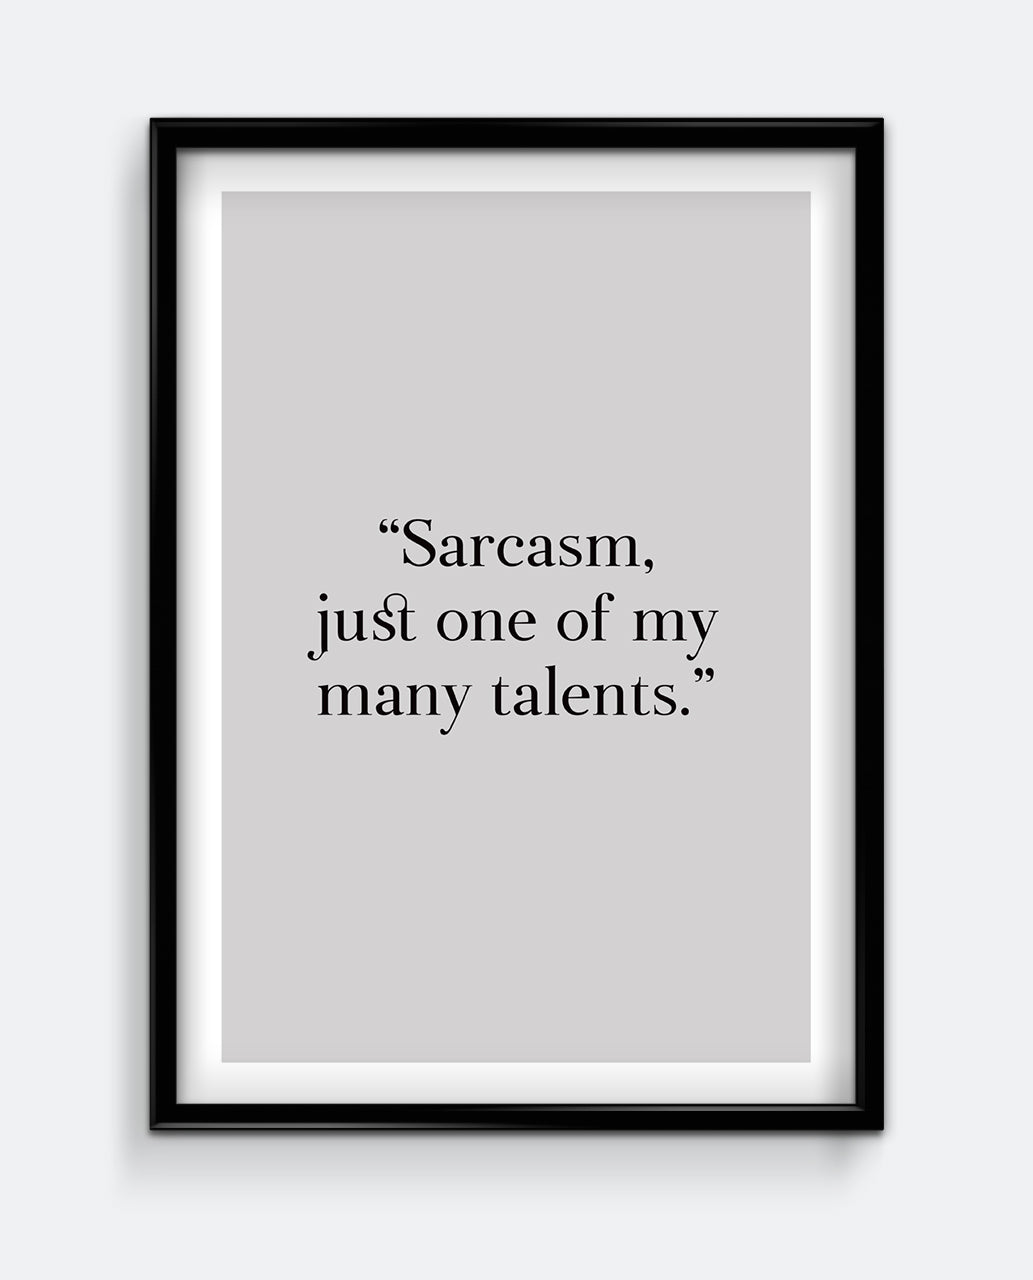 Sarcasm, just one of my many talents